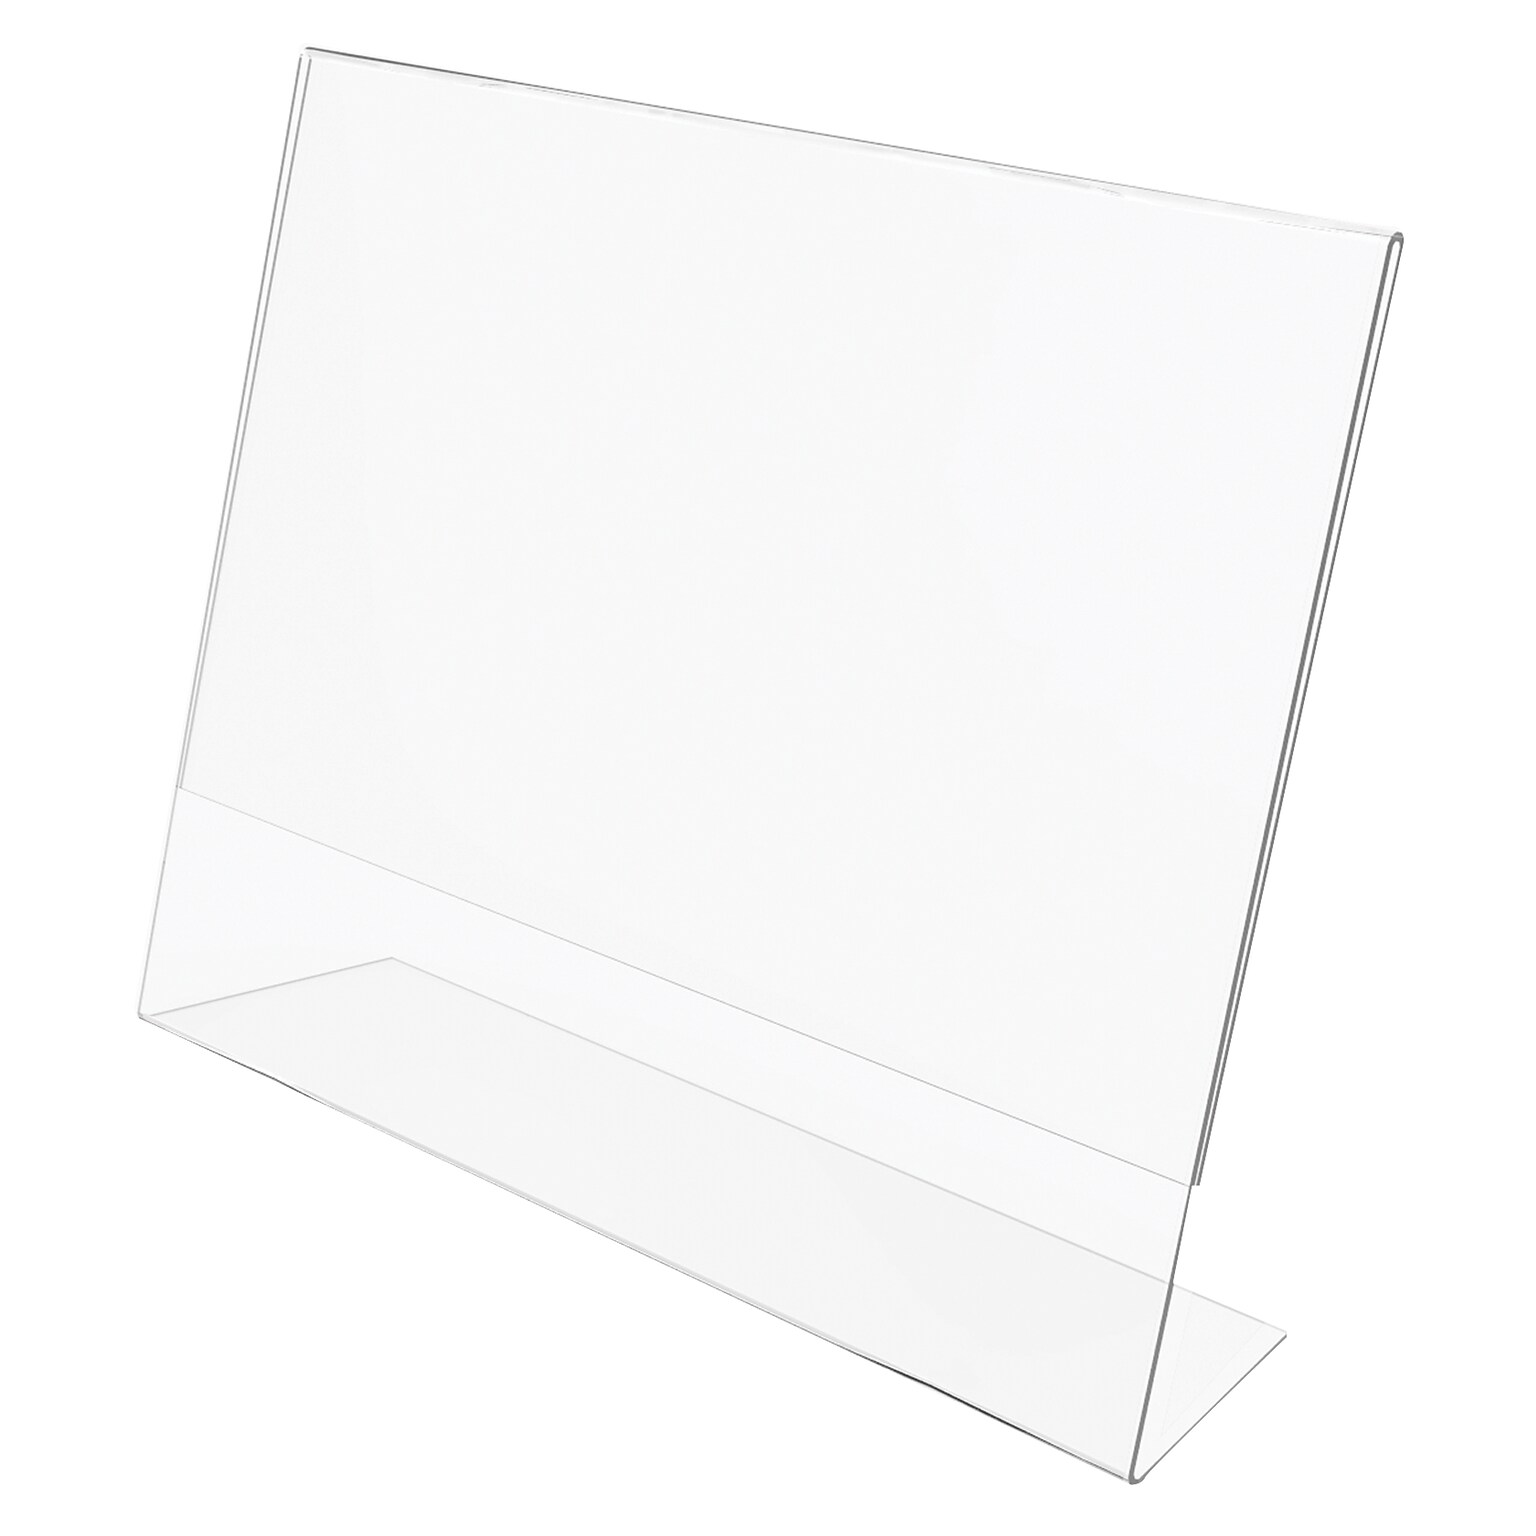 Deflect-O Classic Image Sign Holder, 11 x 8.5, Clear Plastic (66701)